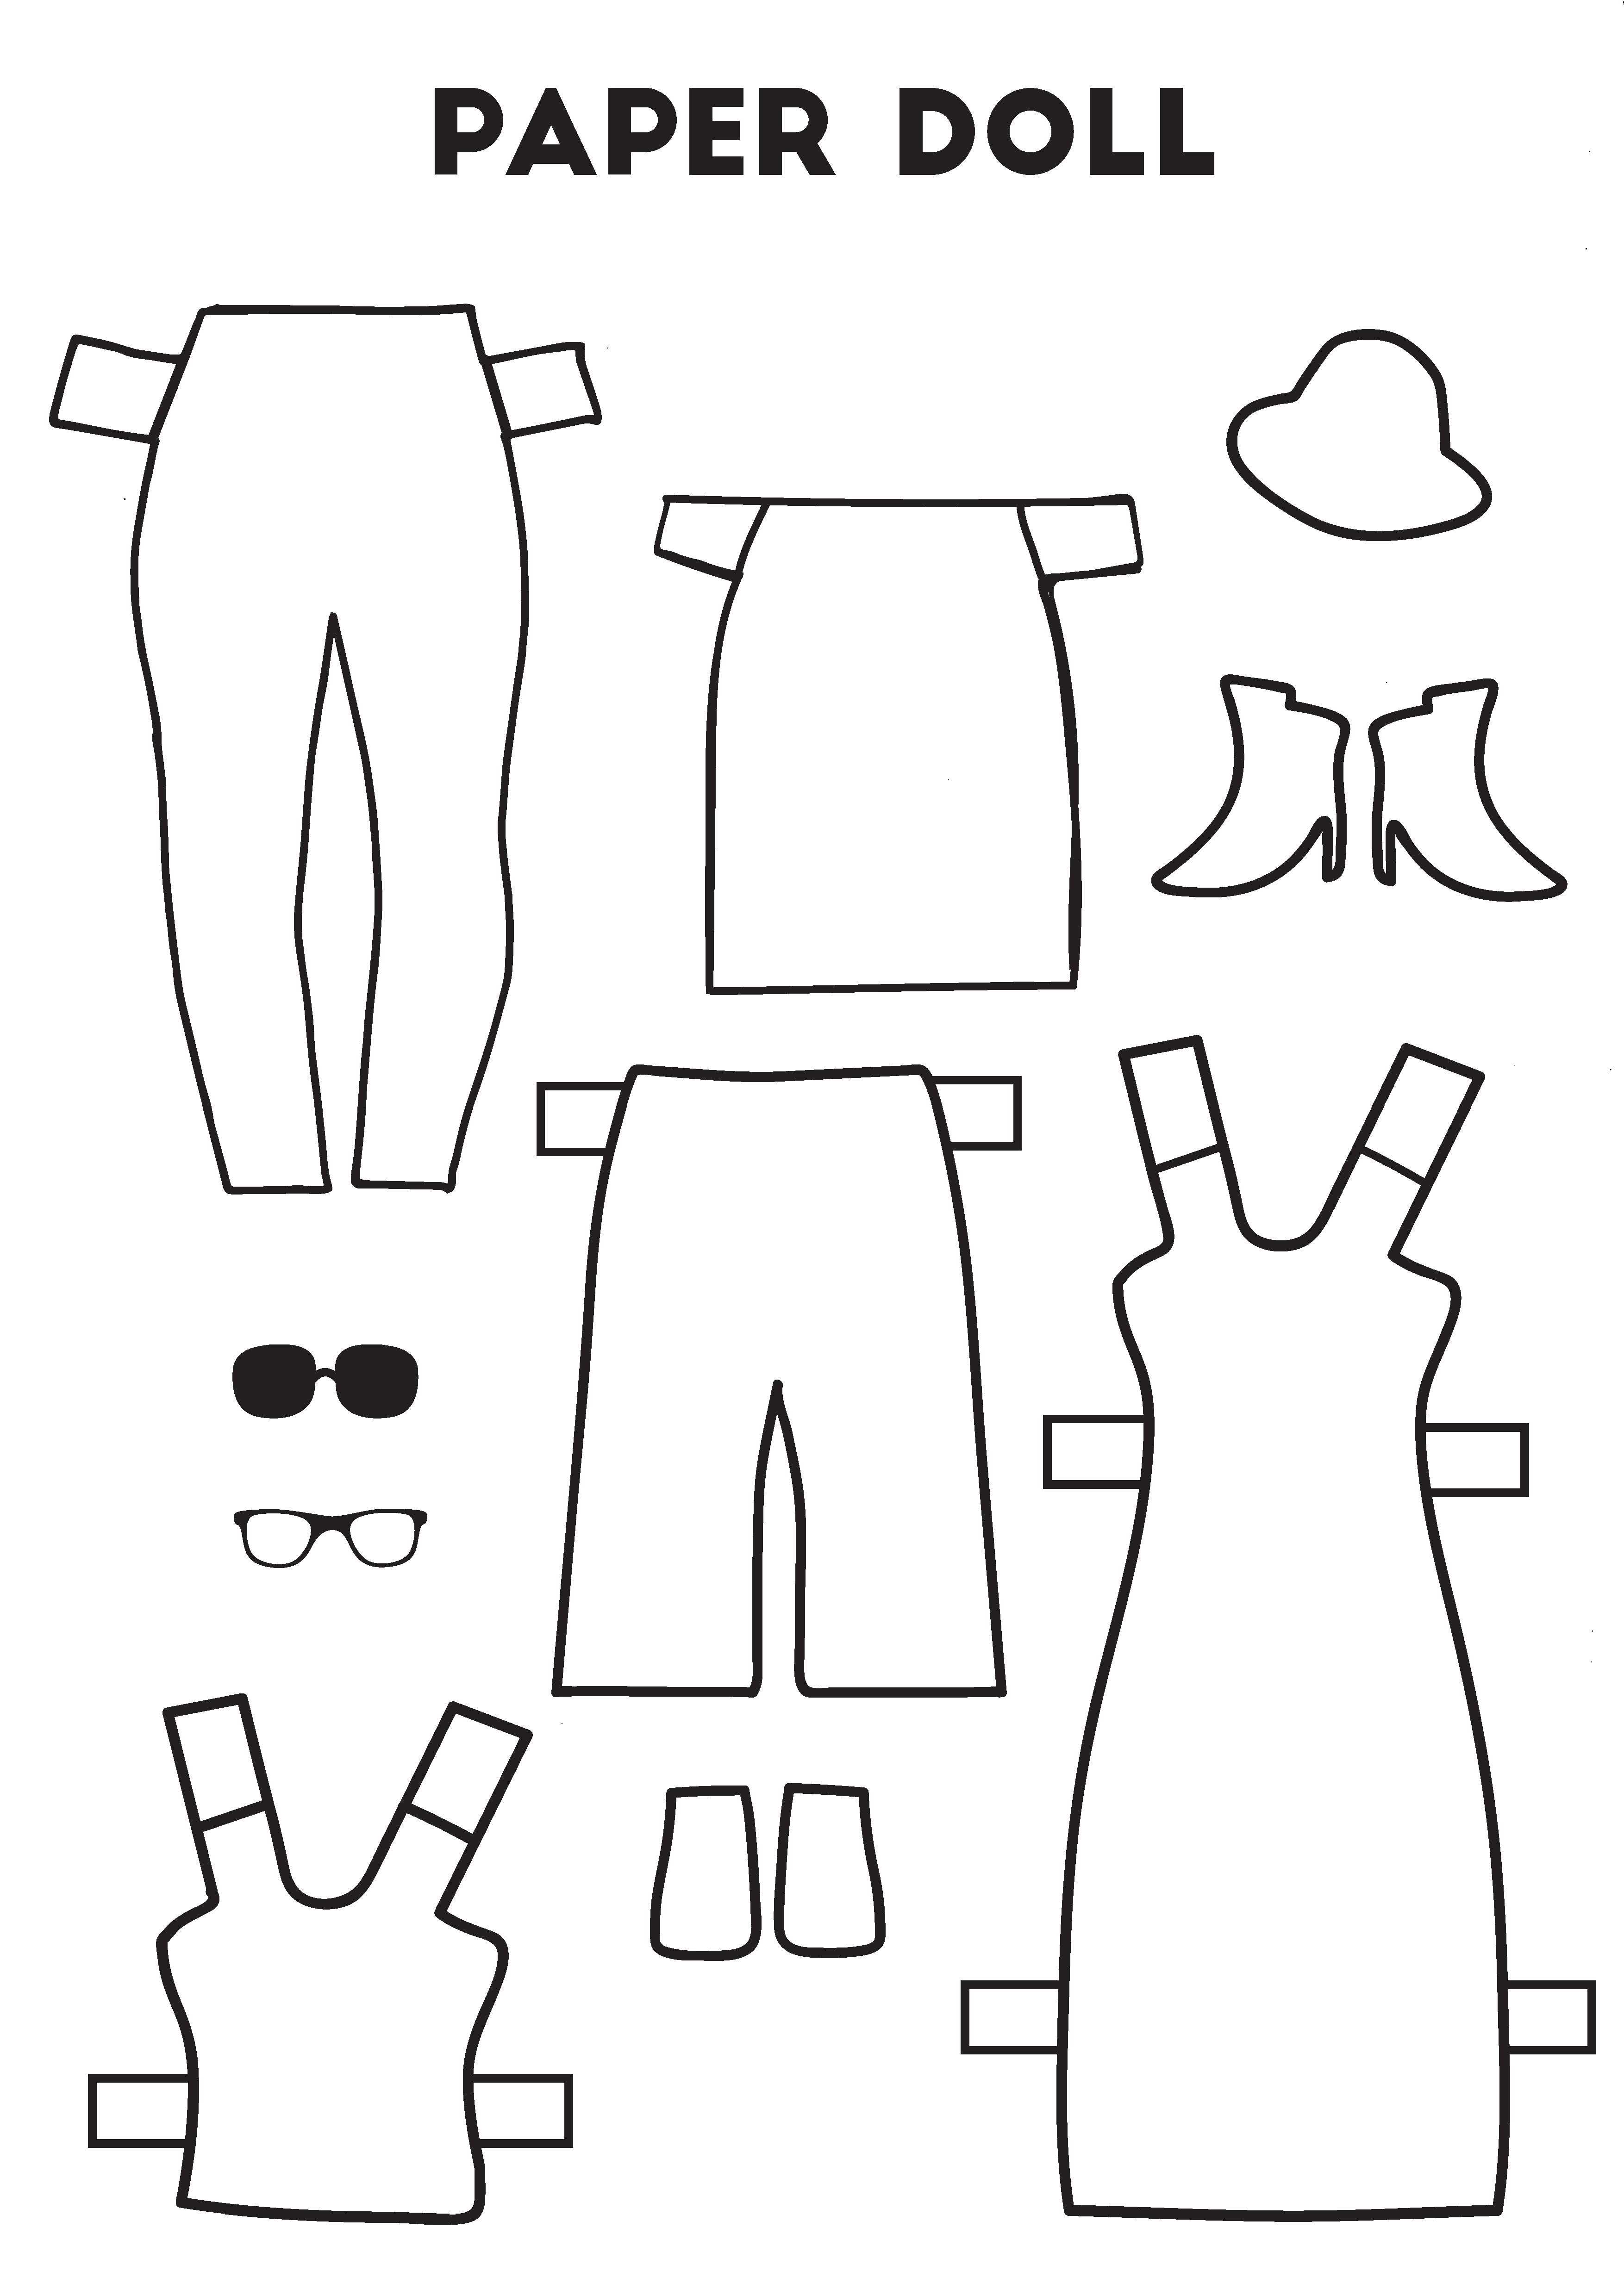 Paper Doll Template V2_Page_5 | Katie Kennedy Design